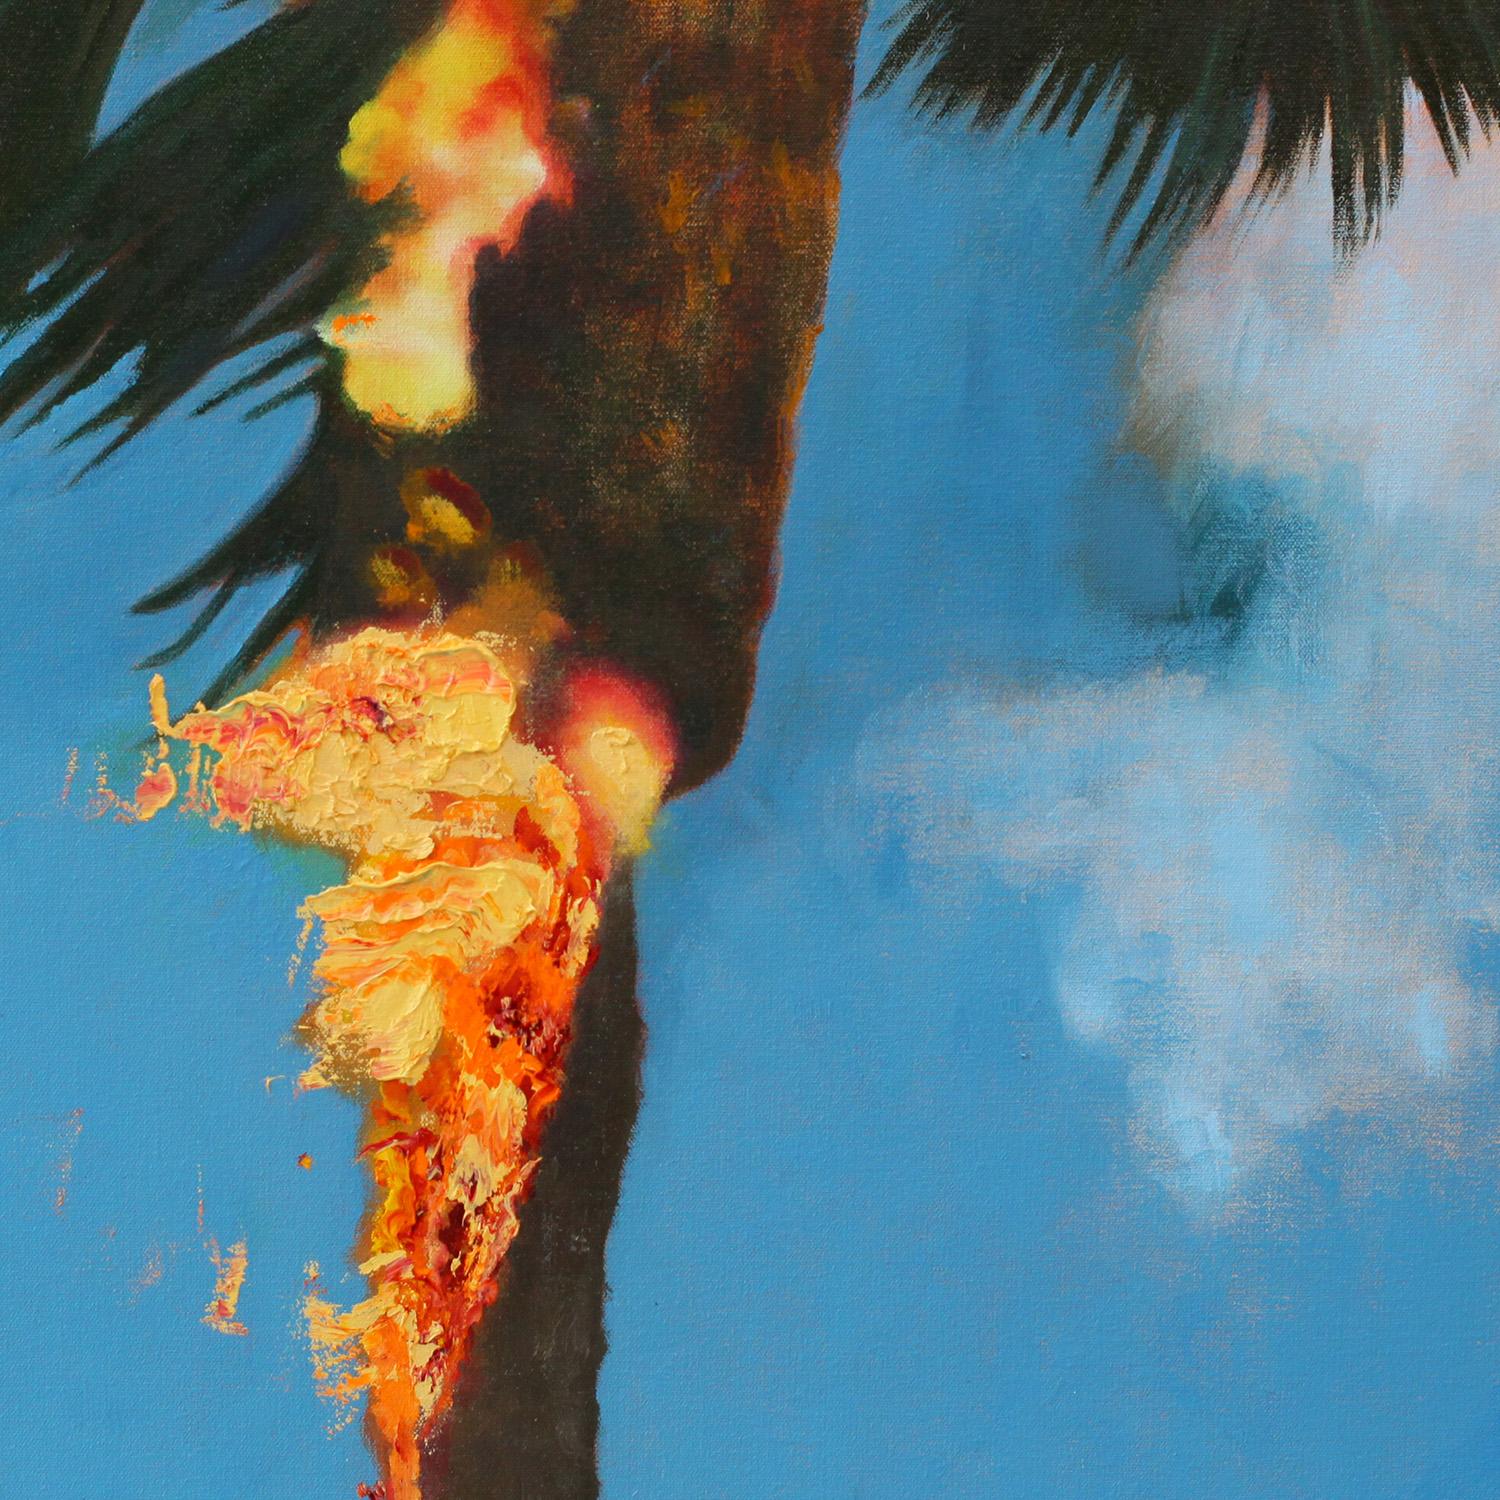 This is a one of a kind original conceptual realistic oil painting by local San Diego artist, Perry Vàsquez. Its dimensions are 28.5 x 96.5. It comes in a wooden neutral frame.

The artist has depicted a palm tree on fire against a blue sky